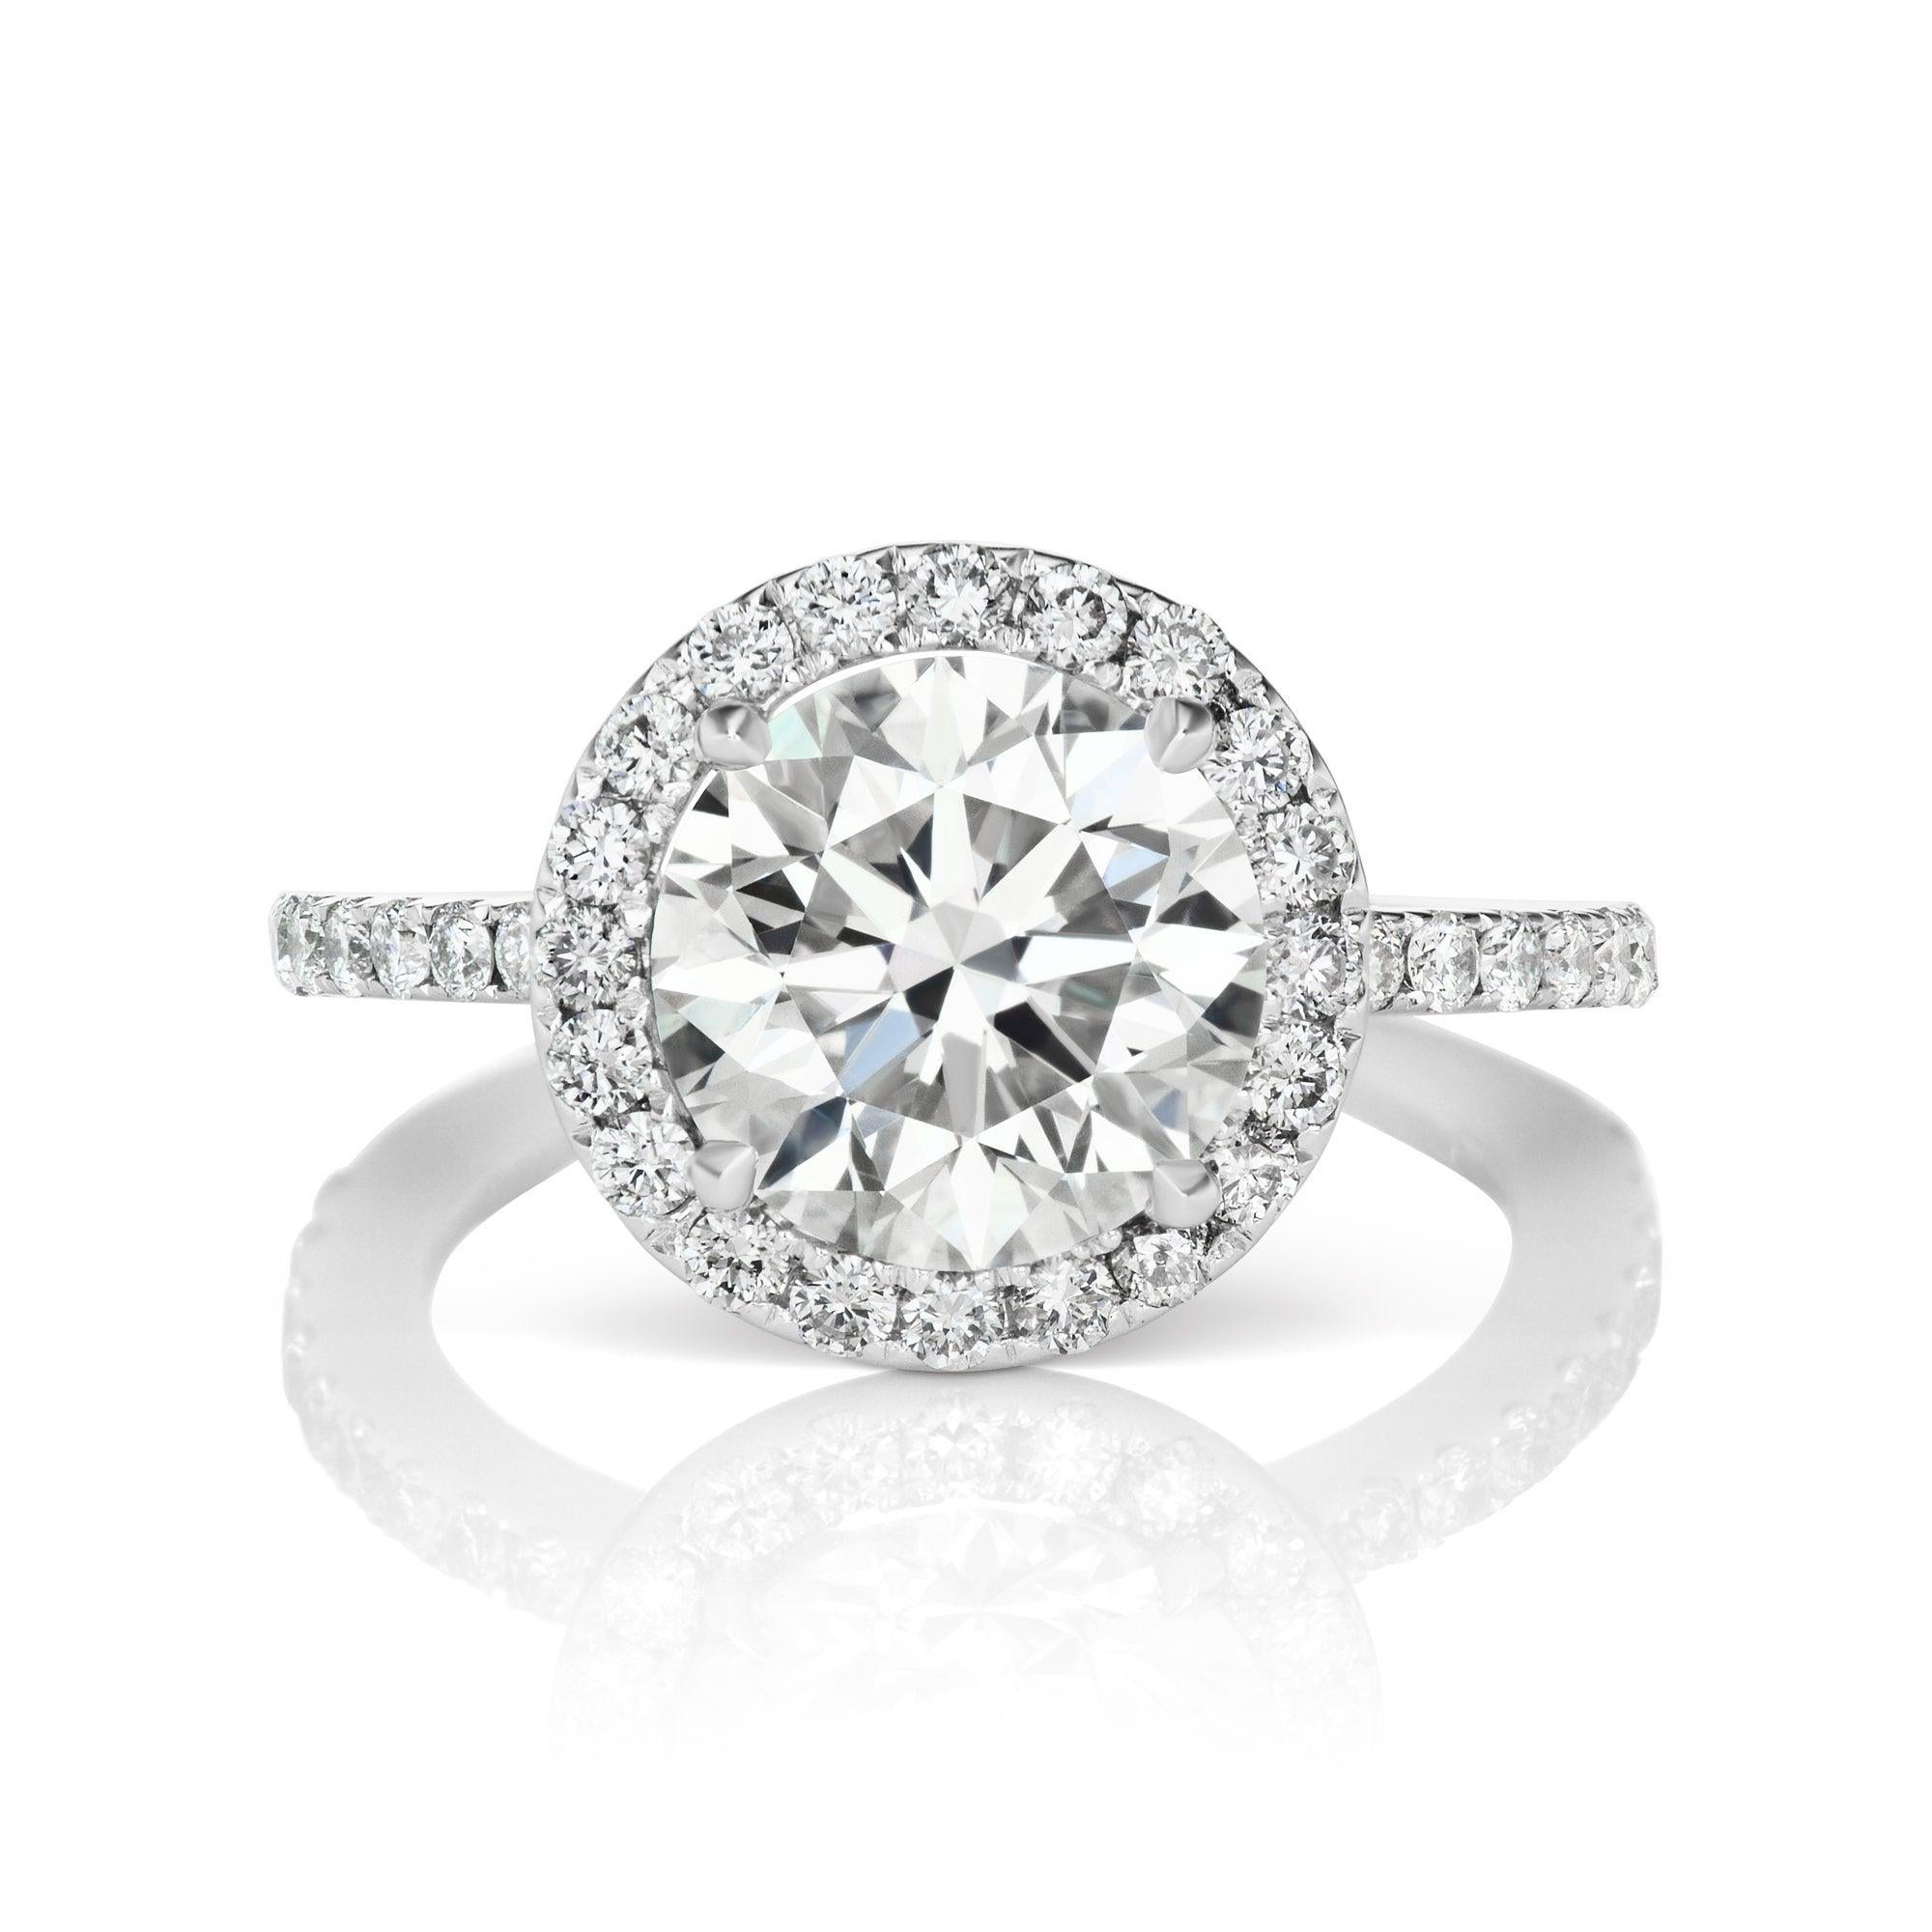  TALIA ROUND CUT DIAMOND ENGAGEMENT RING in 18K WHITE GOLD BY MIKE NEKTA

Center Diamond:
Carat Weight: 2.24 Carats
Color : I
Clarity: VS1*
Style: ROUND BRILLIANT
Measurements: 8.29 x 8.32 x 5.23 mm
* Clarity Enhanced

Ring:
Metal: 18K WHITE GOLD 